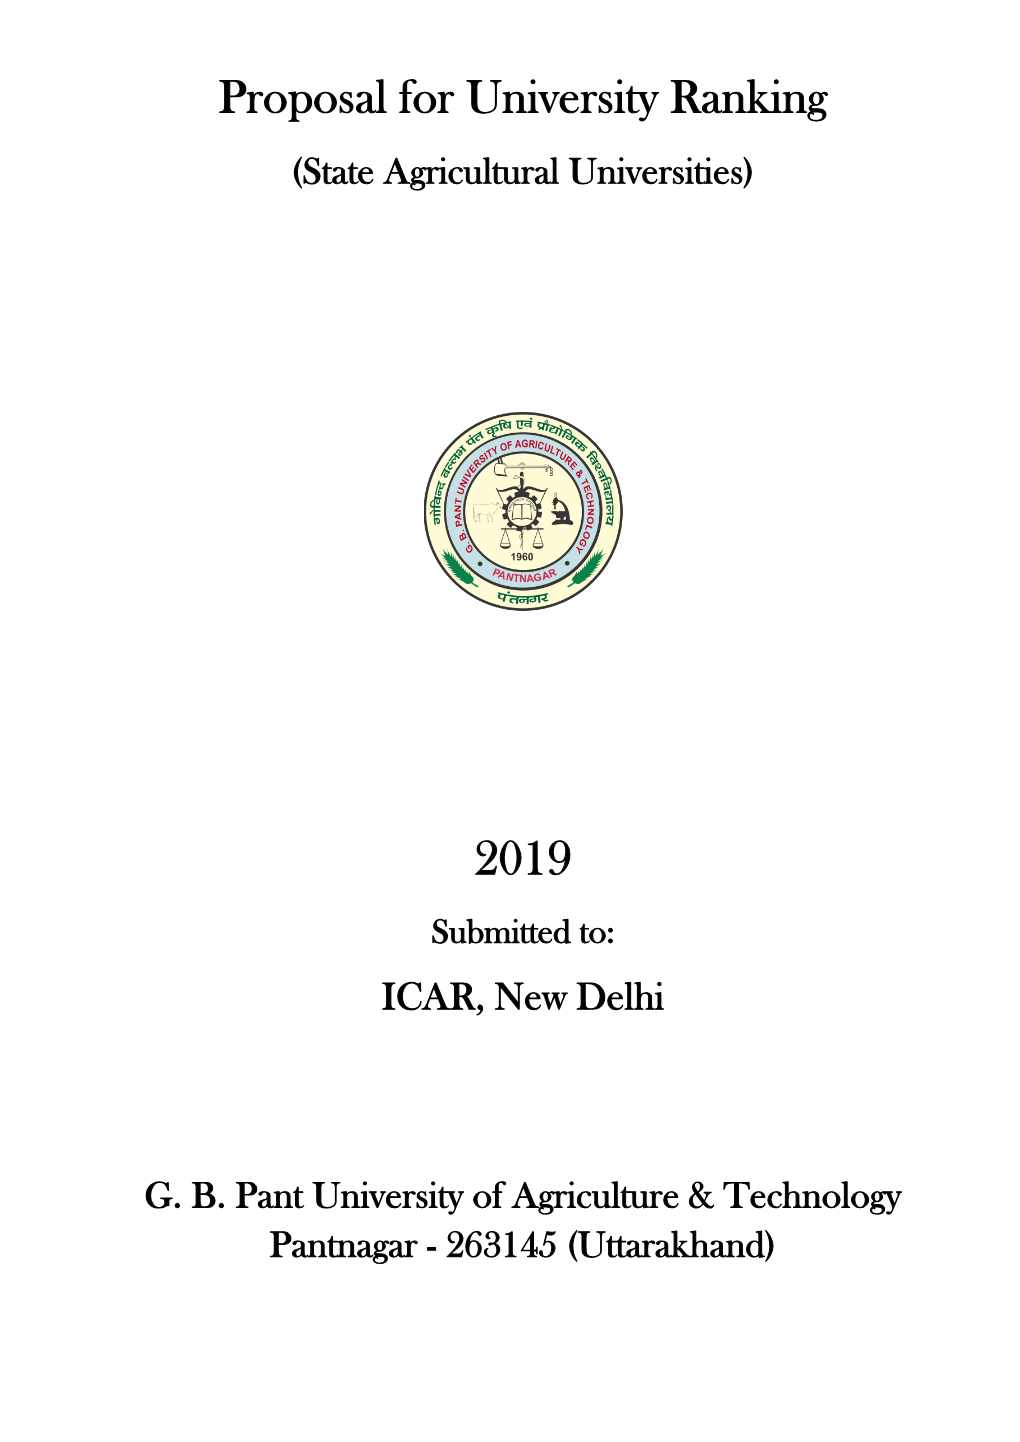 Proposal for University Ranking (State Agricultural Universities)